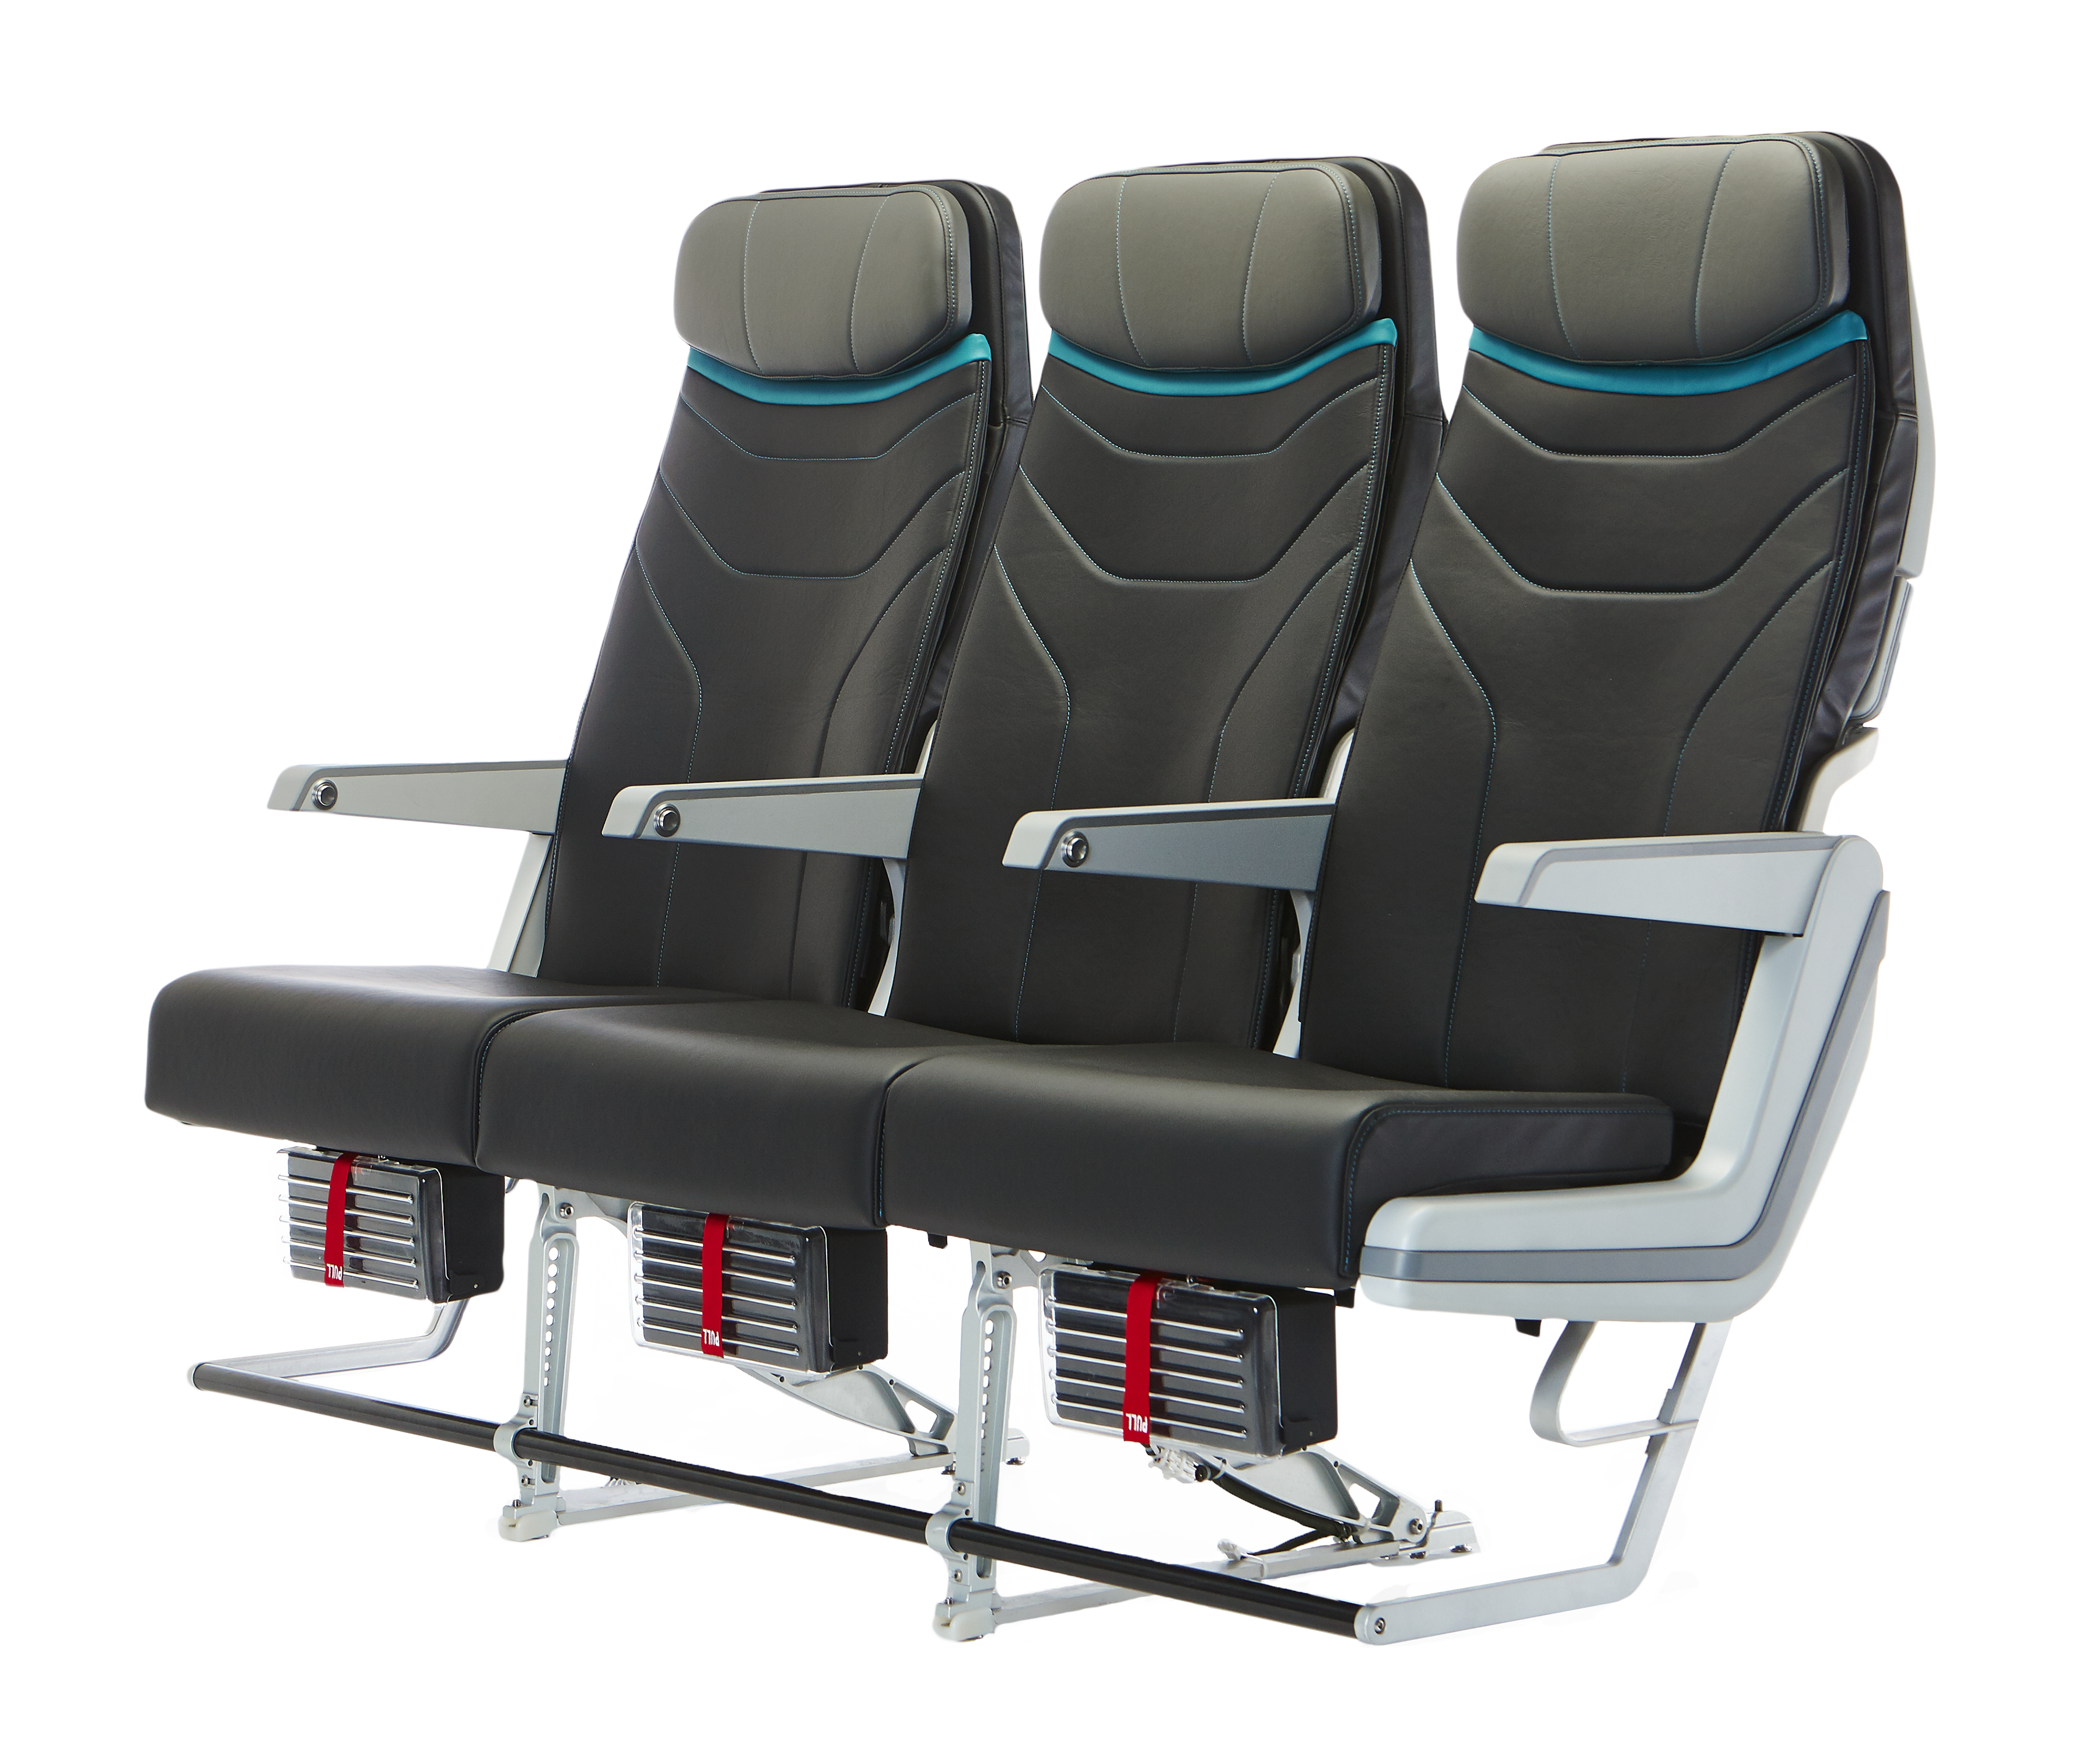 Haeco, a provider of aircraft maintenance, repair and overhaul (MRO) services used TeXtreme to help improve its current seat design.